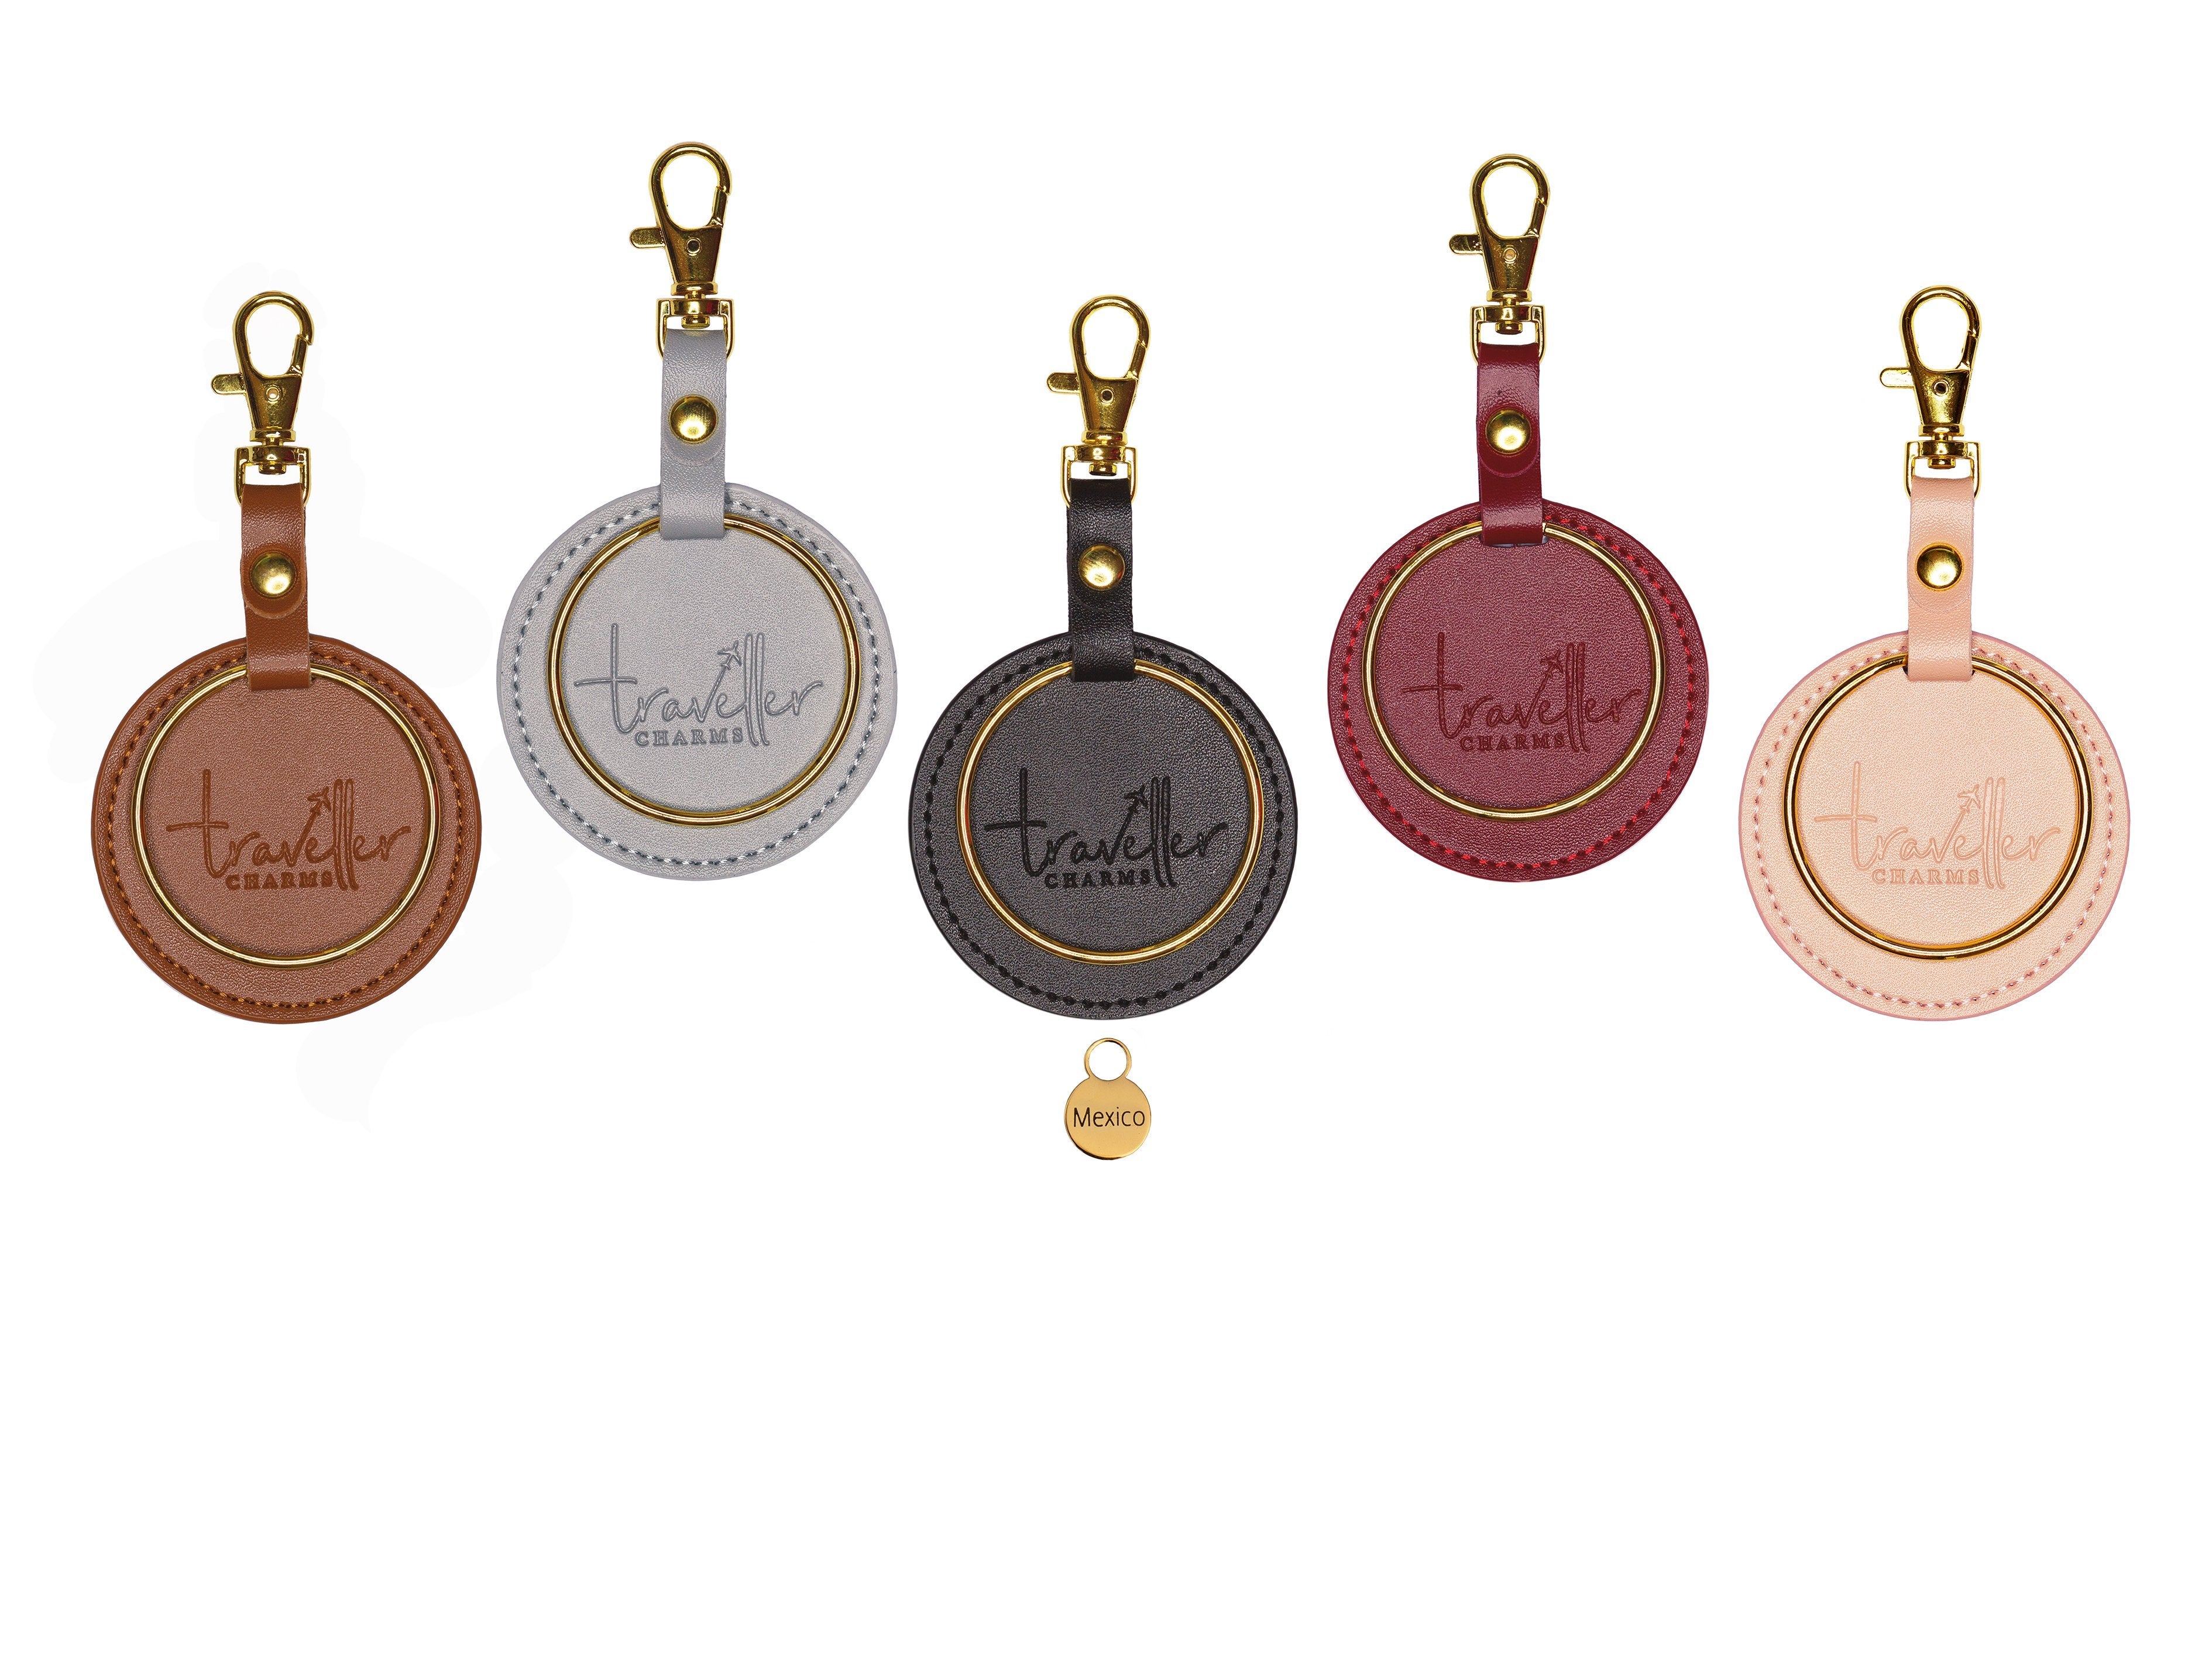 GOLD Gift Set - Key Chain & 1 Engraved Travel Charms - Traveller Charms